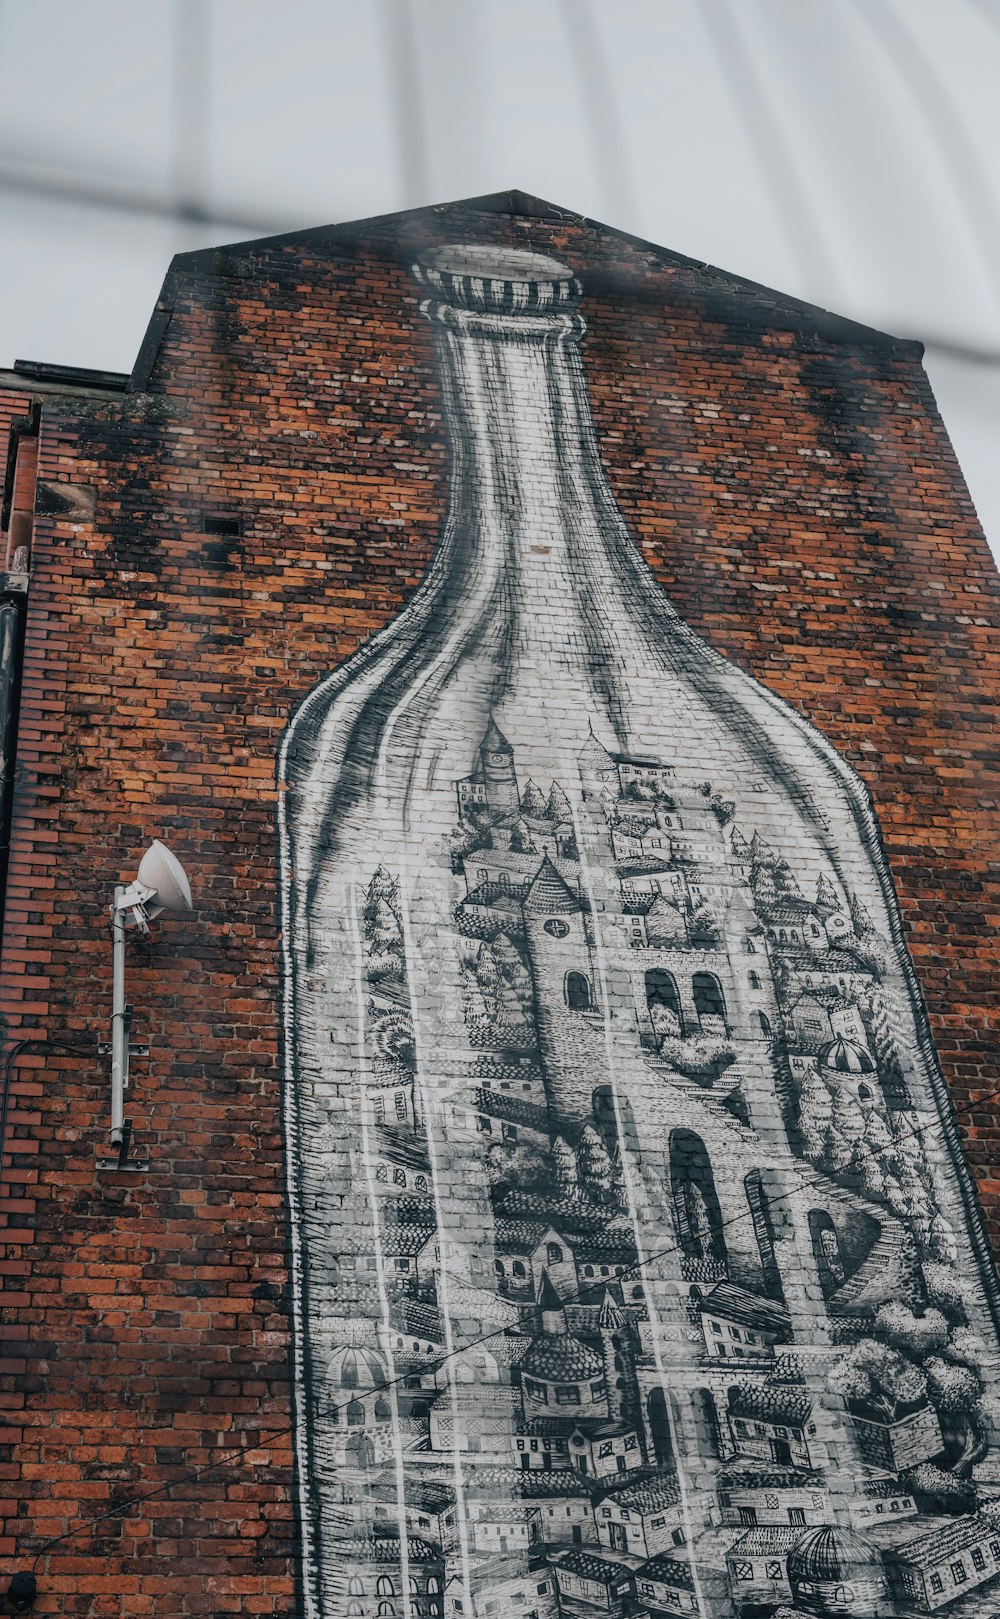 a large mural on the side of a brick building